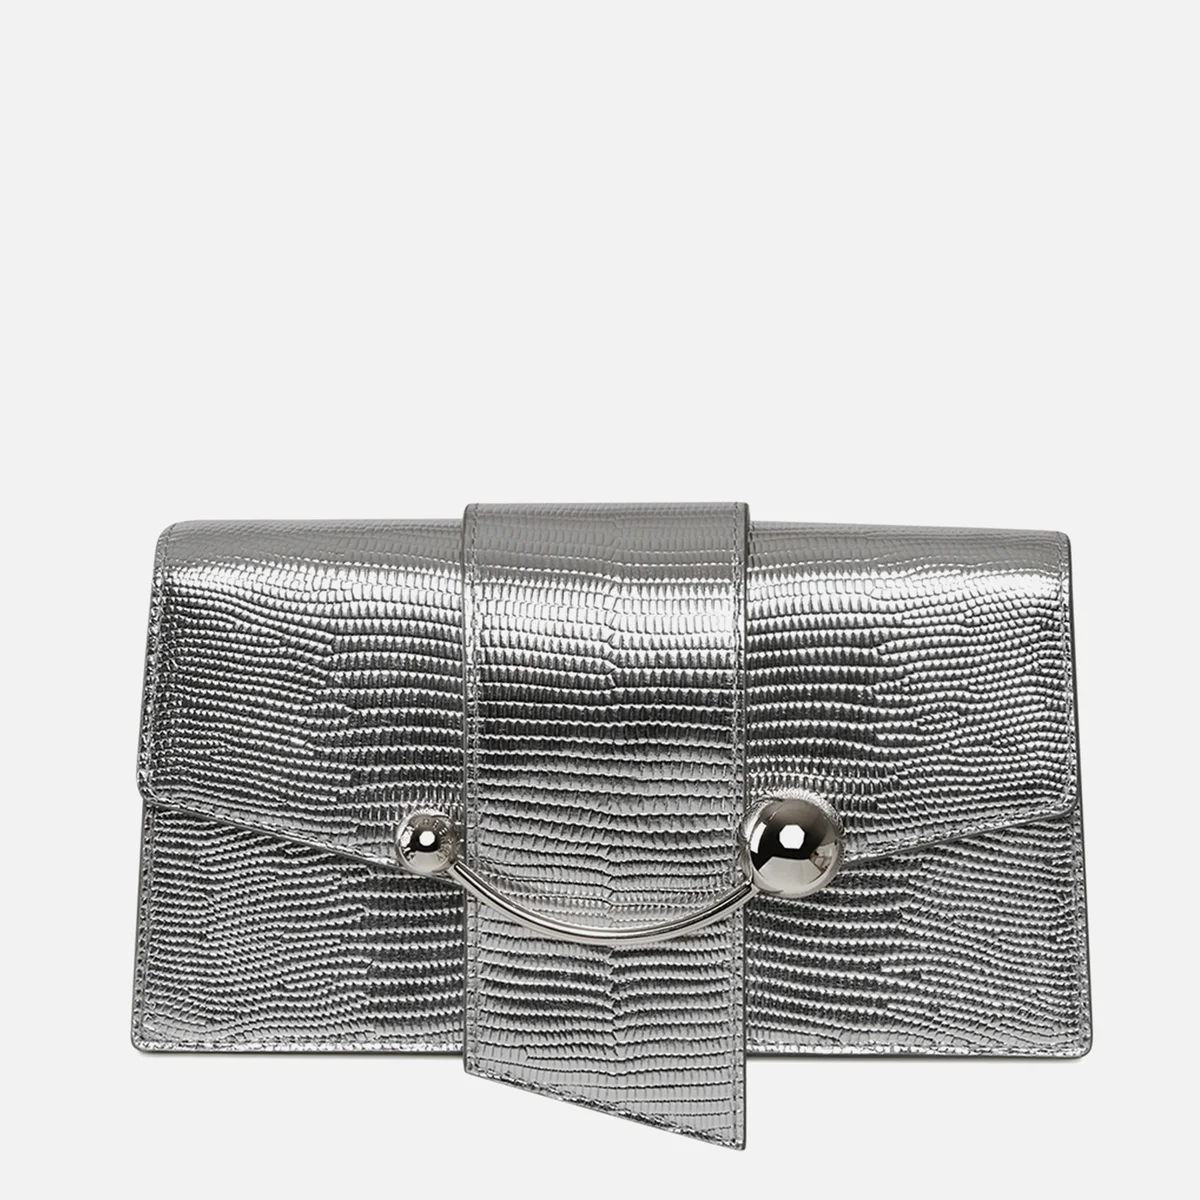 Strathberry Crescent On A Chain Metallic Leather Lizard Clutch Bag Image 1